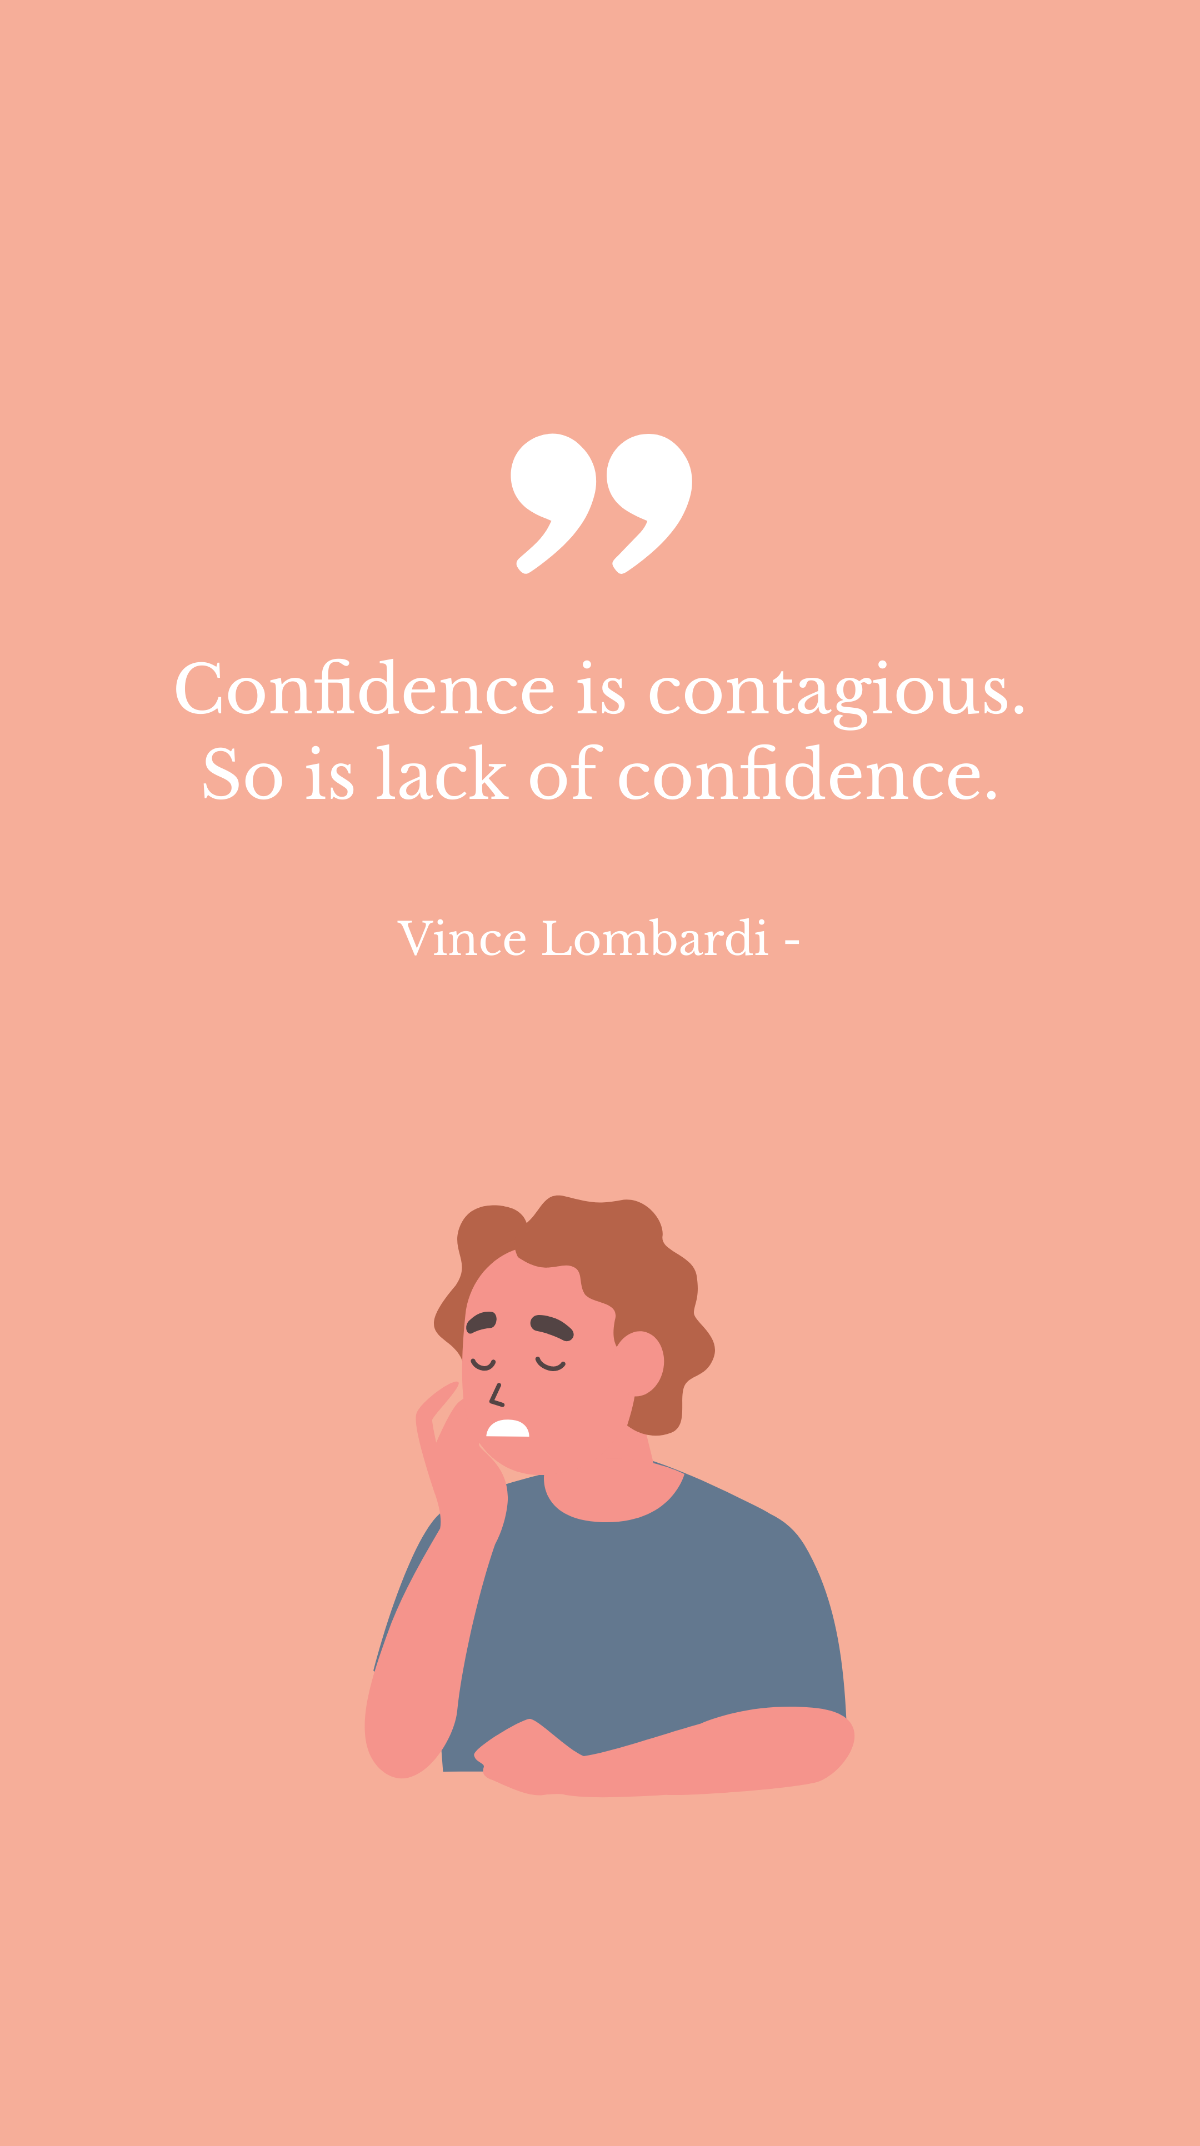 Vince Lombardi - Confidence is contagious. So is lack of confidence. Template